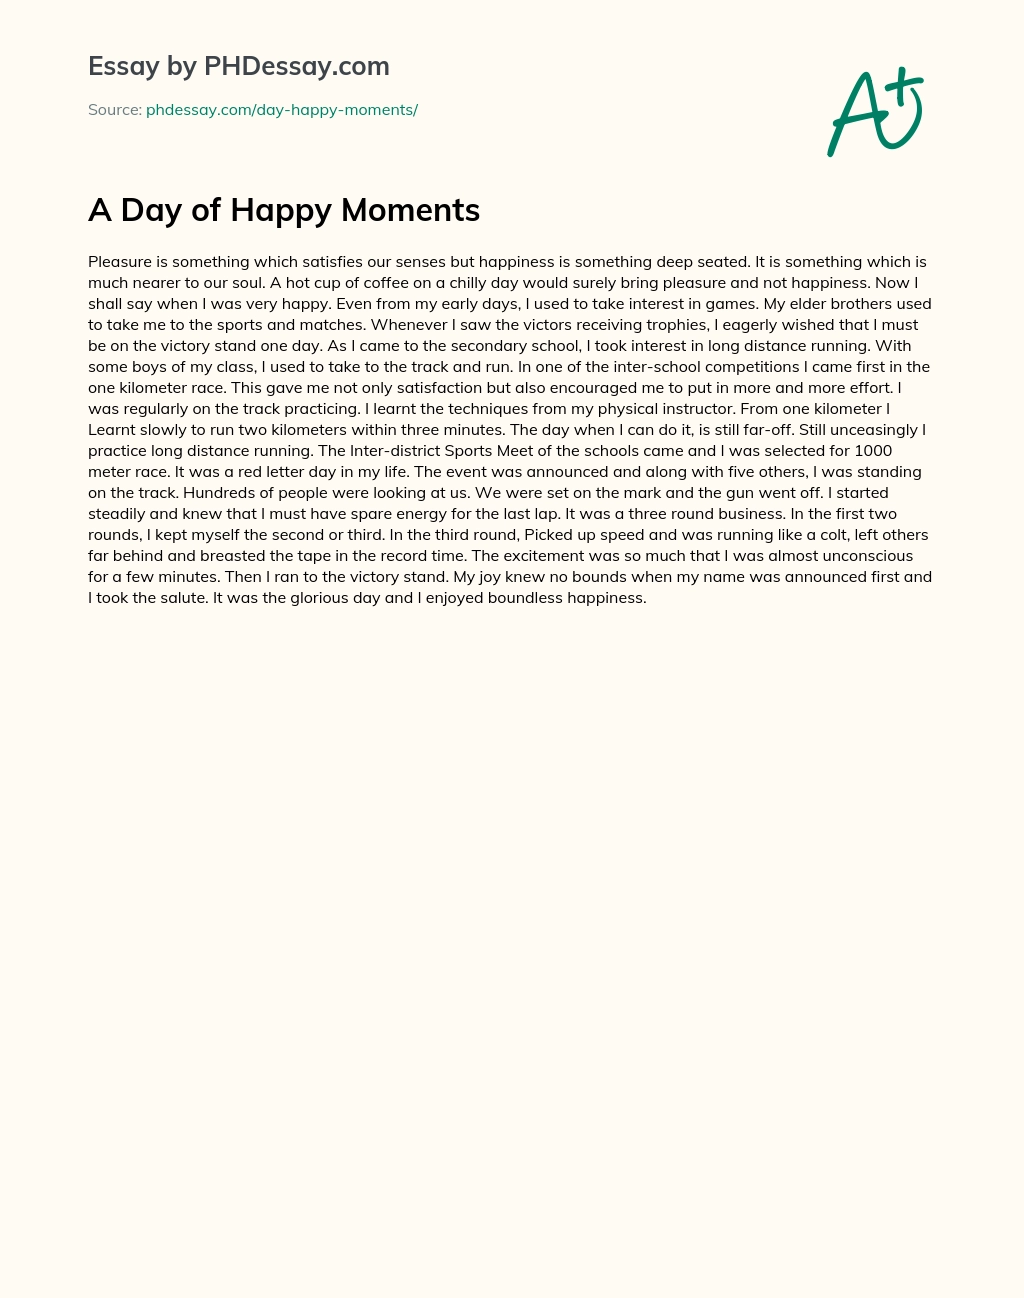 A Day of Happy Moments essay